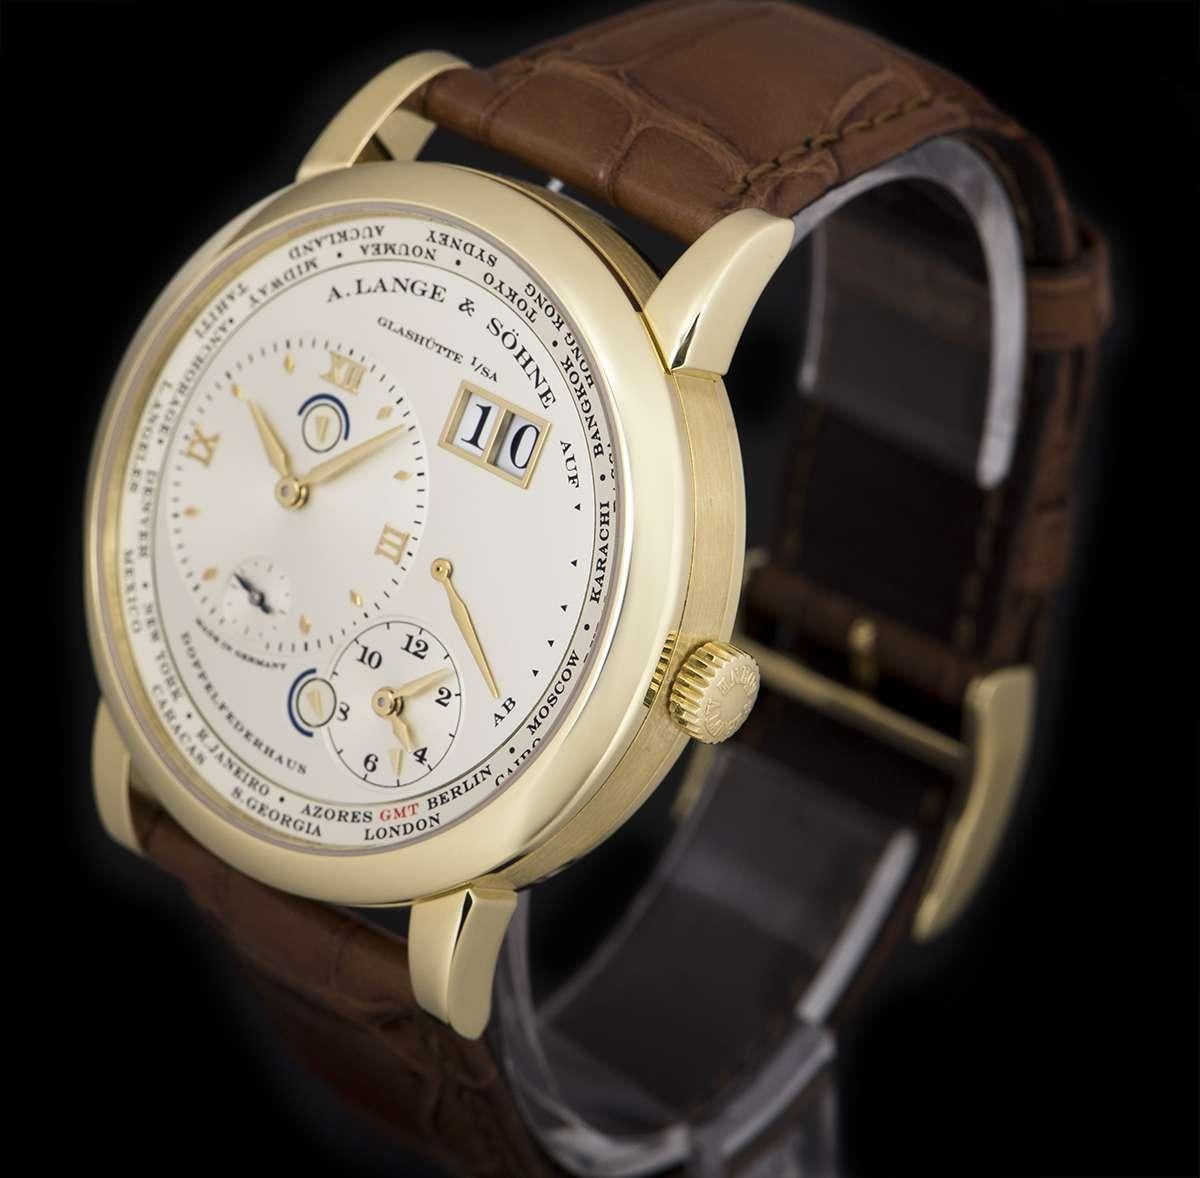 An 18k Yellow Gold Lange 1 Time Zone Gents Wristwatch, silver home time dial with applied hour markers, a small seconds display and a day/night indicator, date at 2 0'clock, power reserve indicator at 3 0'clock, second time zone dial at 5 0'clock